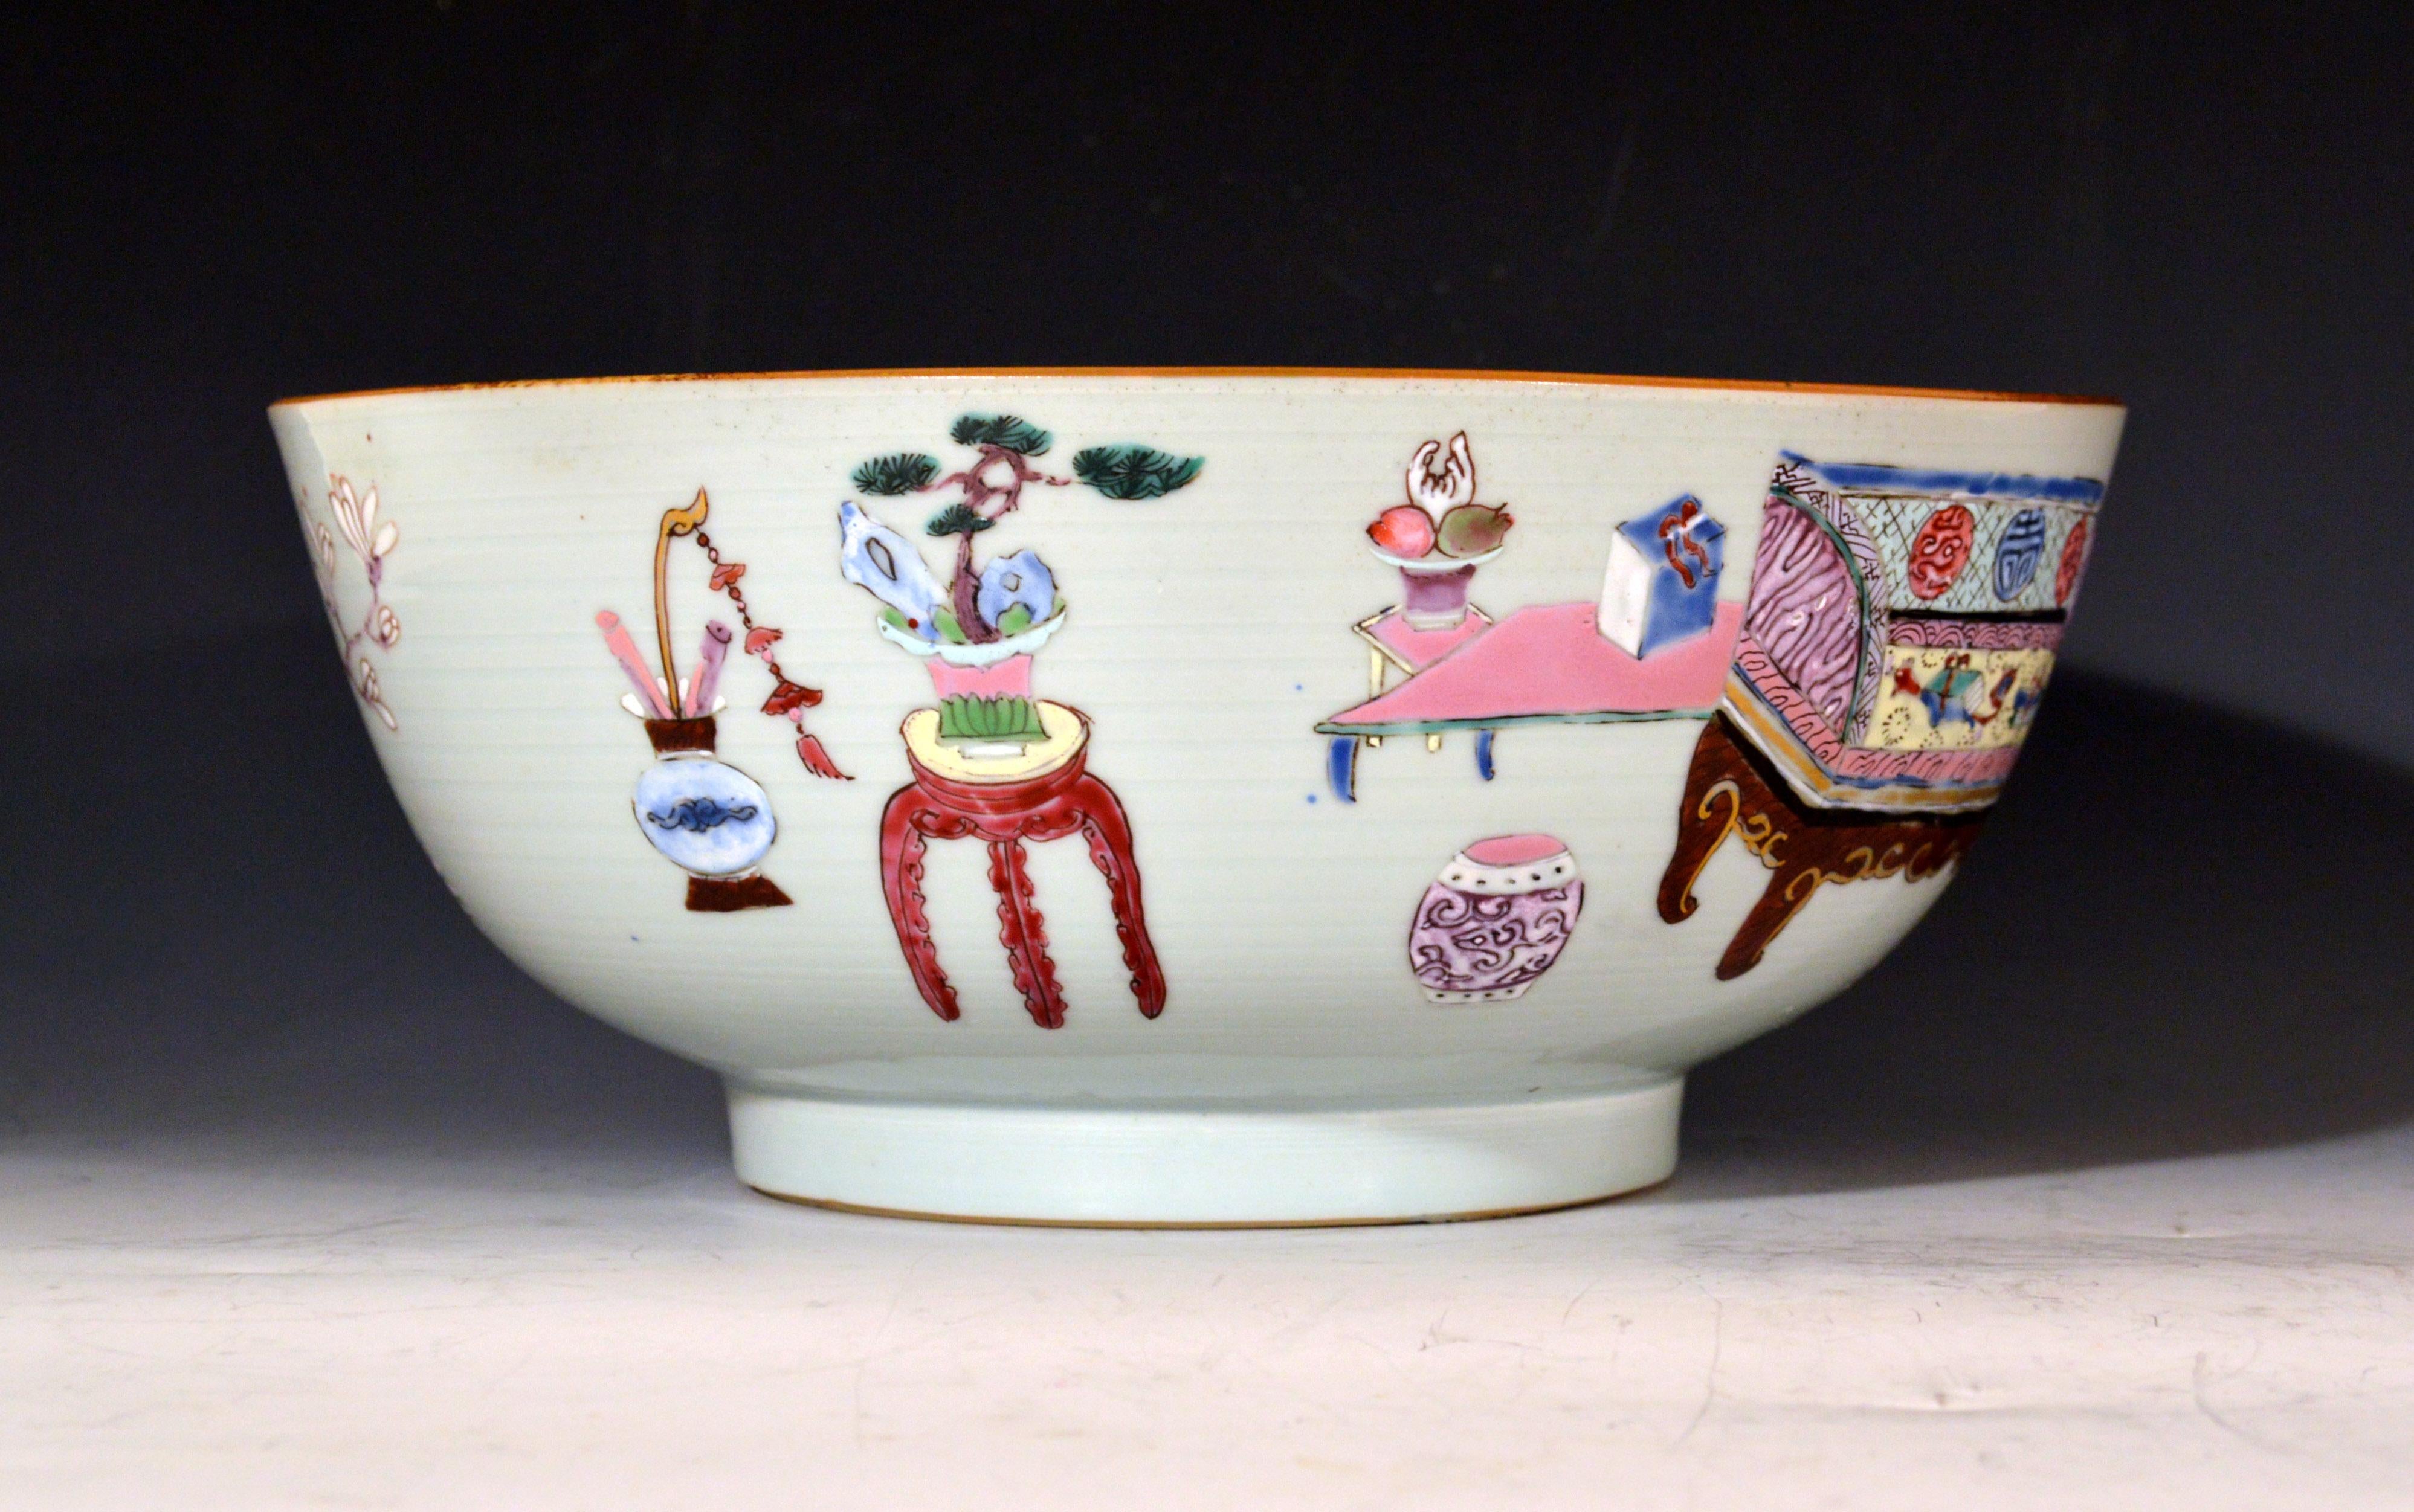 18th Century Chinese Export Porcelain Bowl with Chinese Domestic Furniture For Sale 2